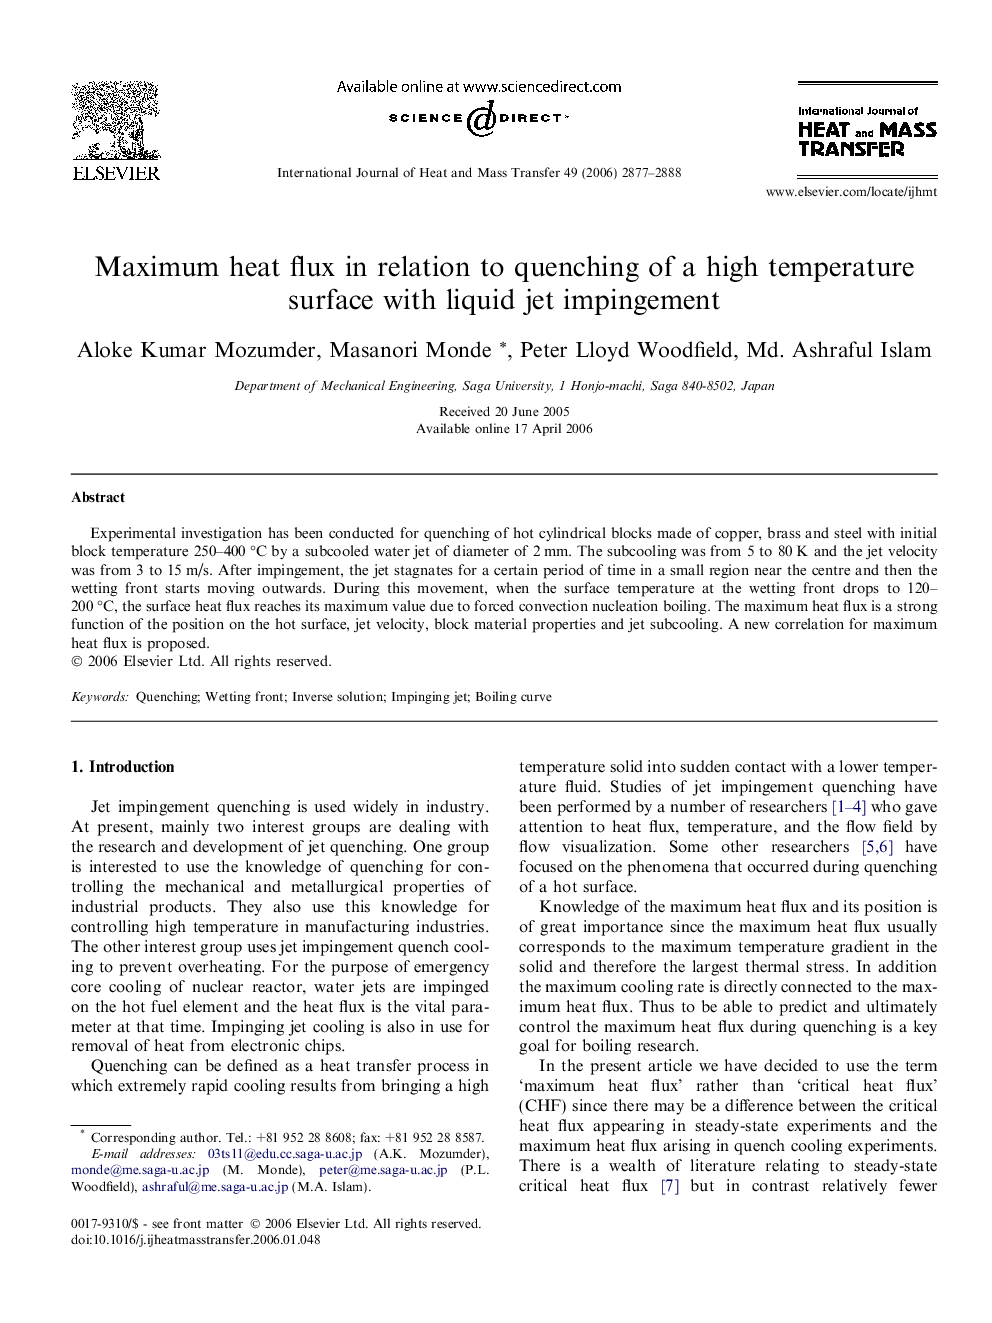 Maximum heat flux in relation to quenching of a high temperature surface with liquid jet impingement